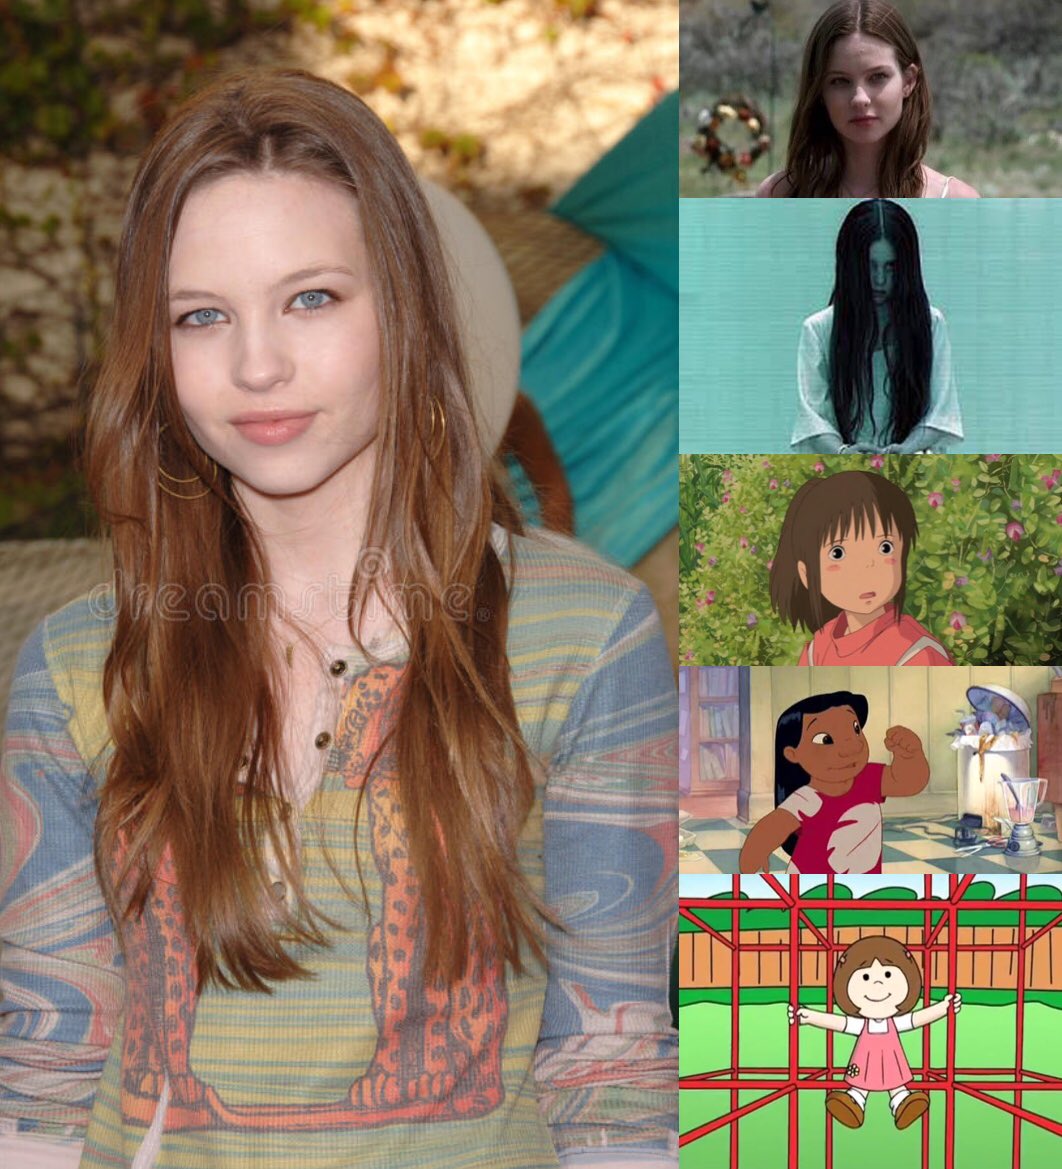 Jake with the Ob on "Happy 32nd Birthday to Daveigh Chase! The actress who played Samantha Darko in Donnie Darko, Samara in The Ring, and voiced Chihiro in Spirited Away, Lilo